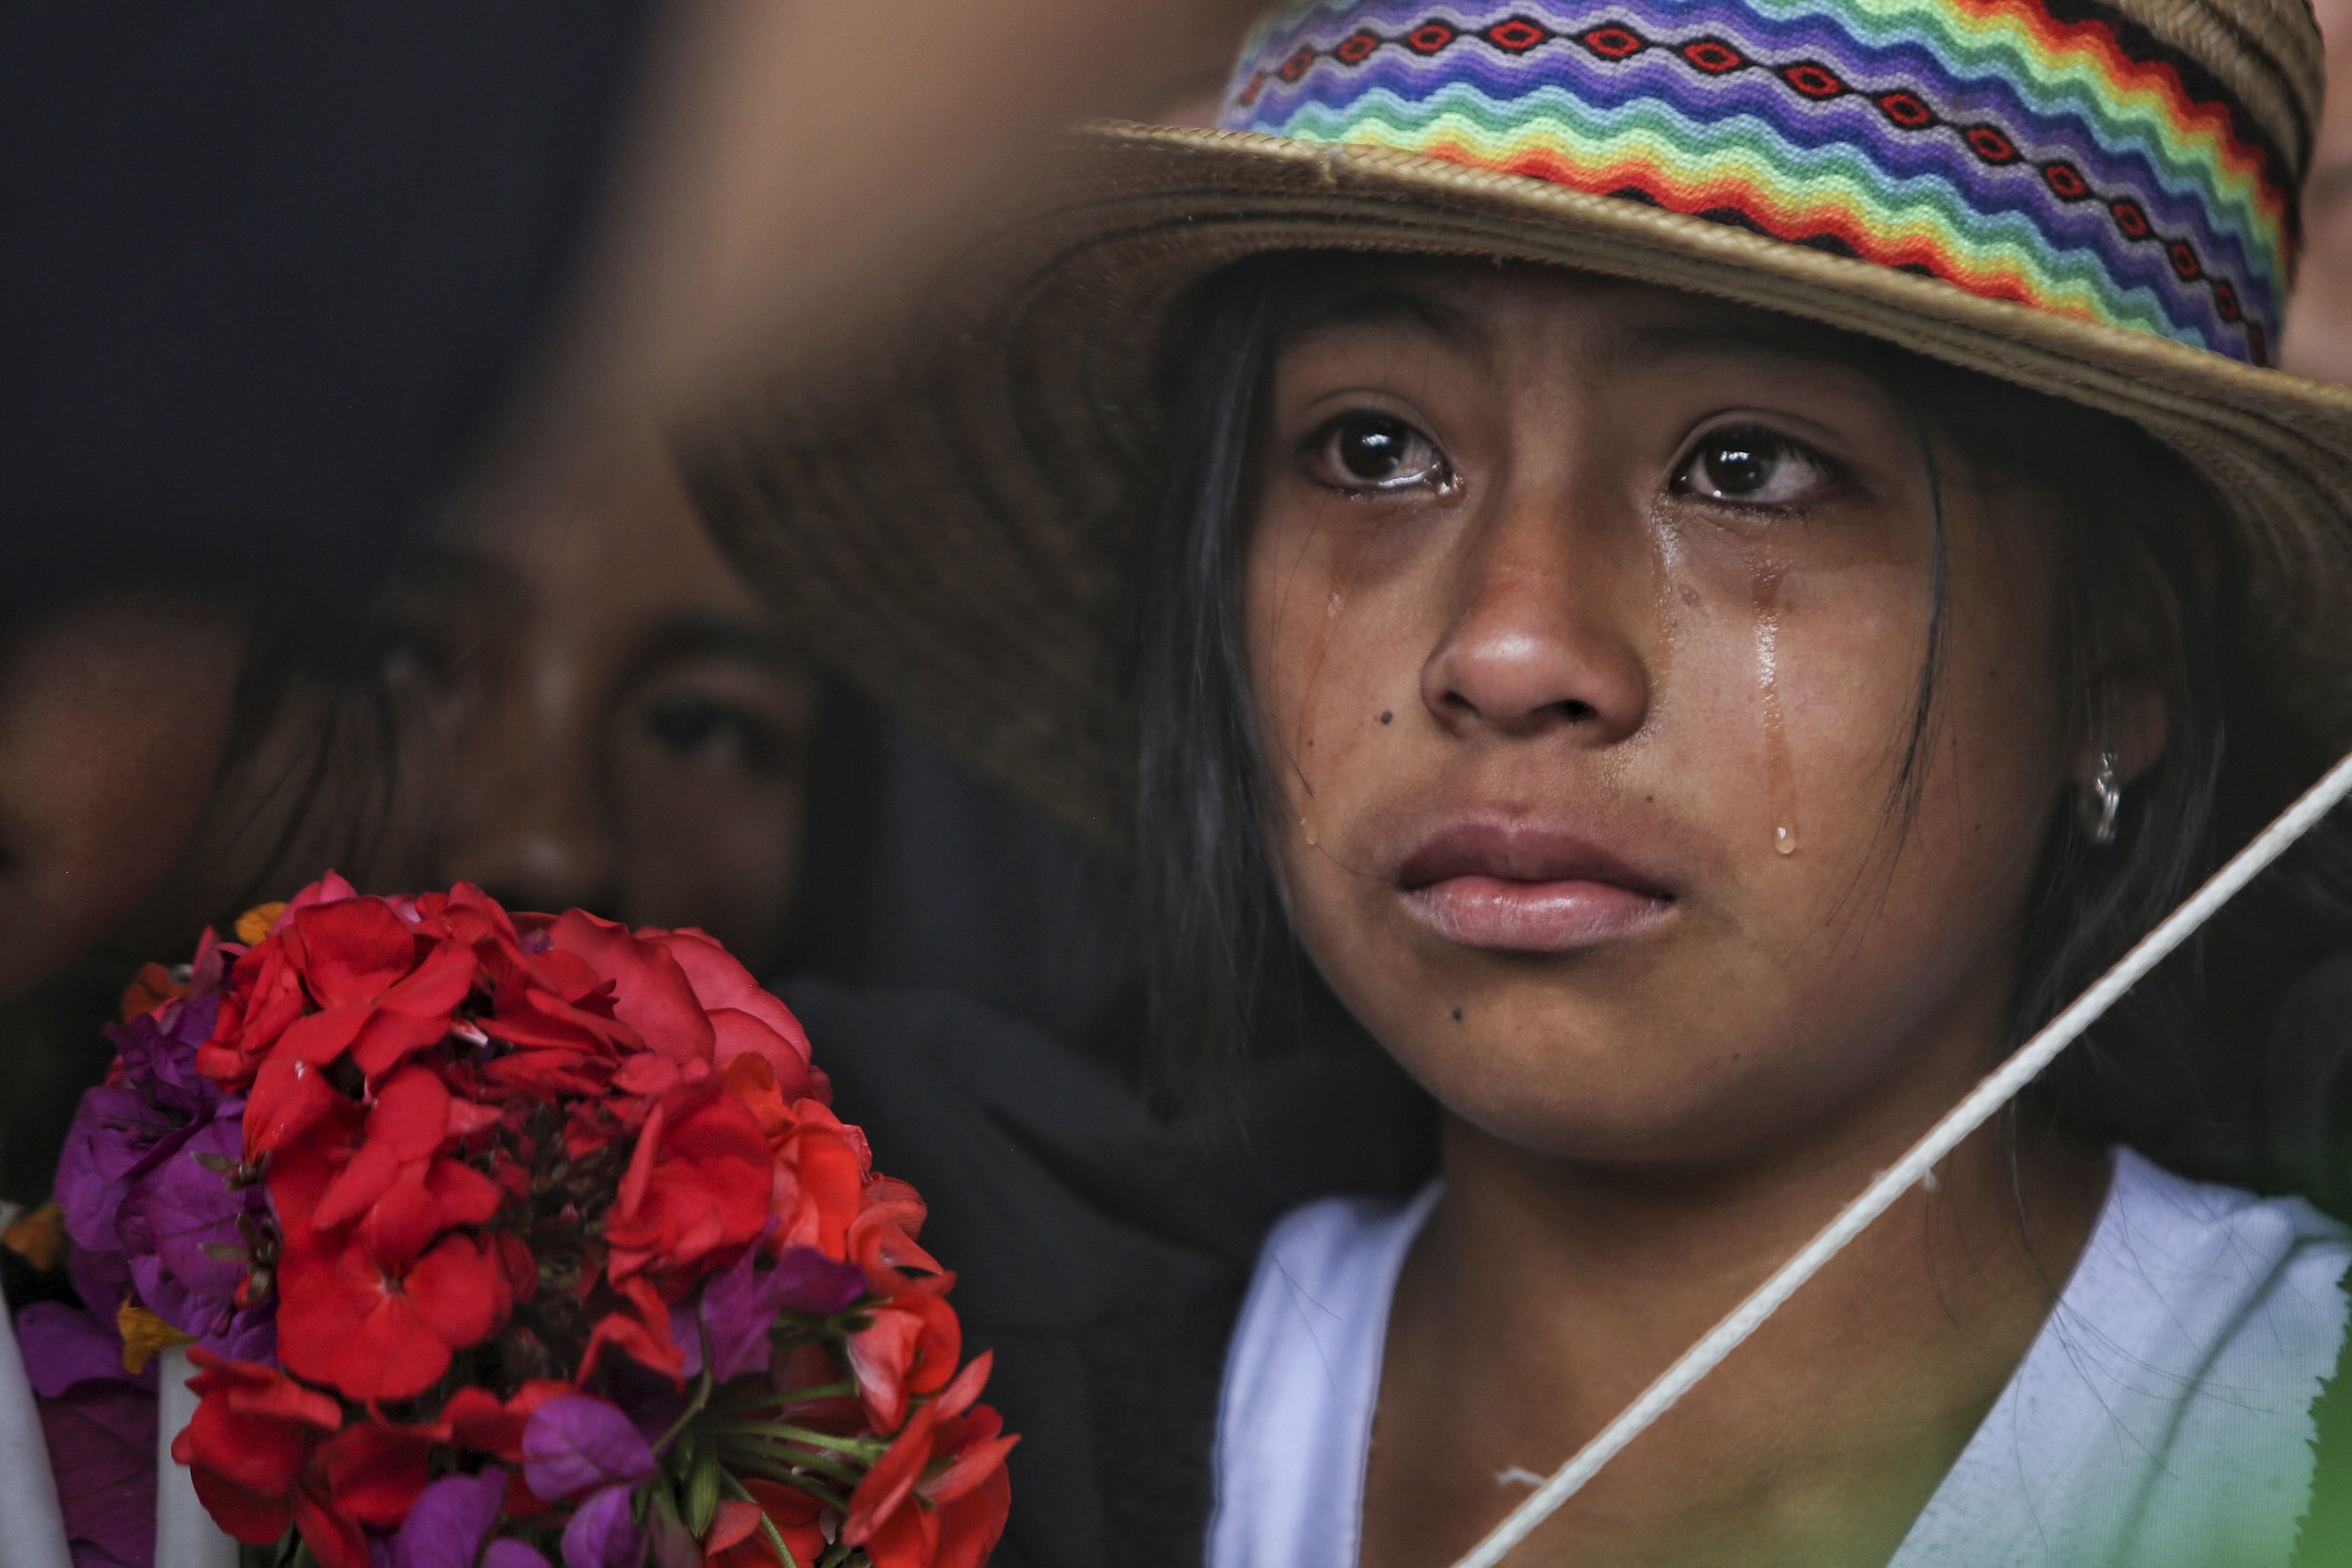  A mourner cries during the wake of Indigenous regional leader Fredy Campo Bomba, in Caldono, Colombia, on July 29, 2023. Campo Bomba was killed by unidentified gunmen on July 26. (AP Photo/Andres Quintero) 